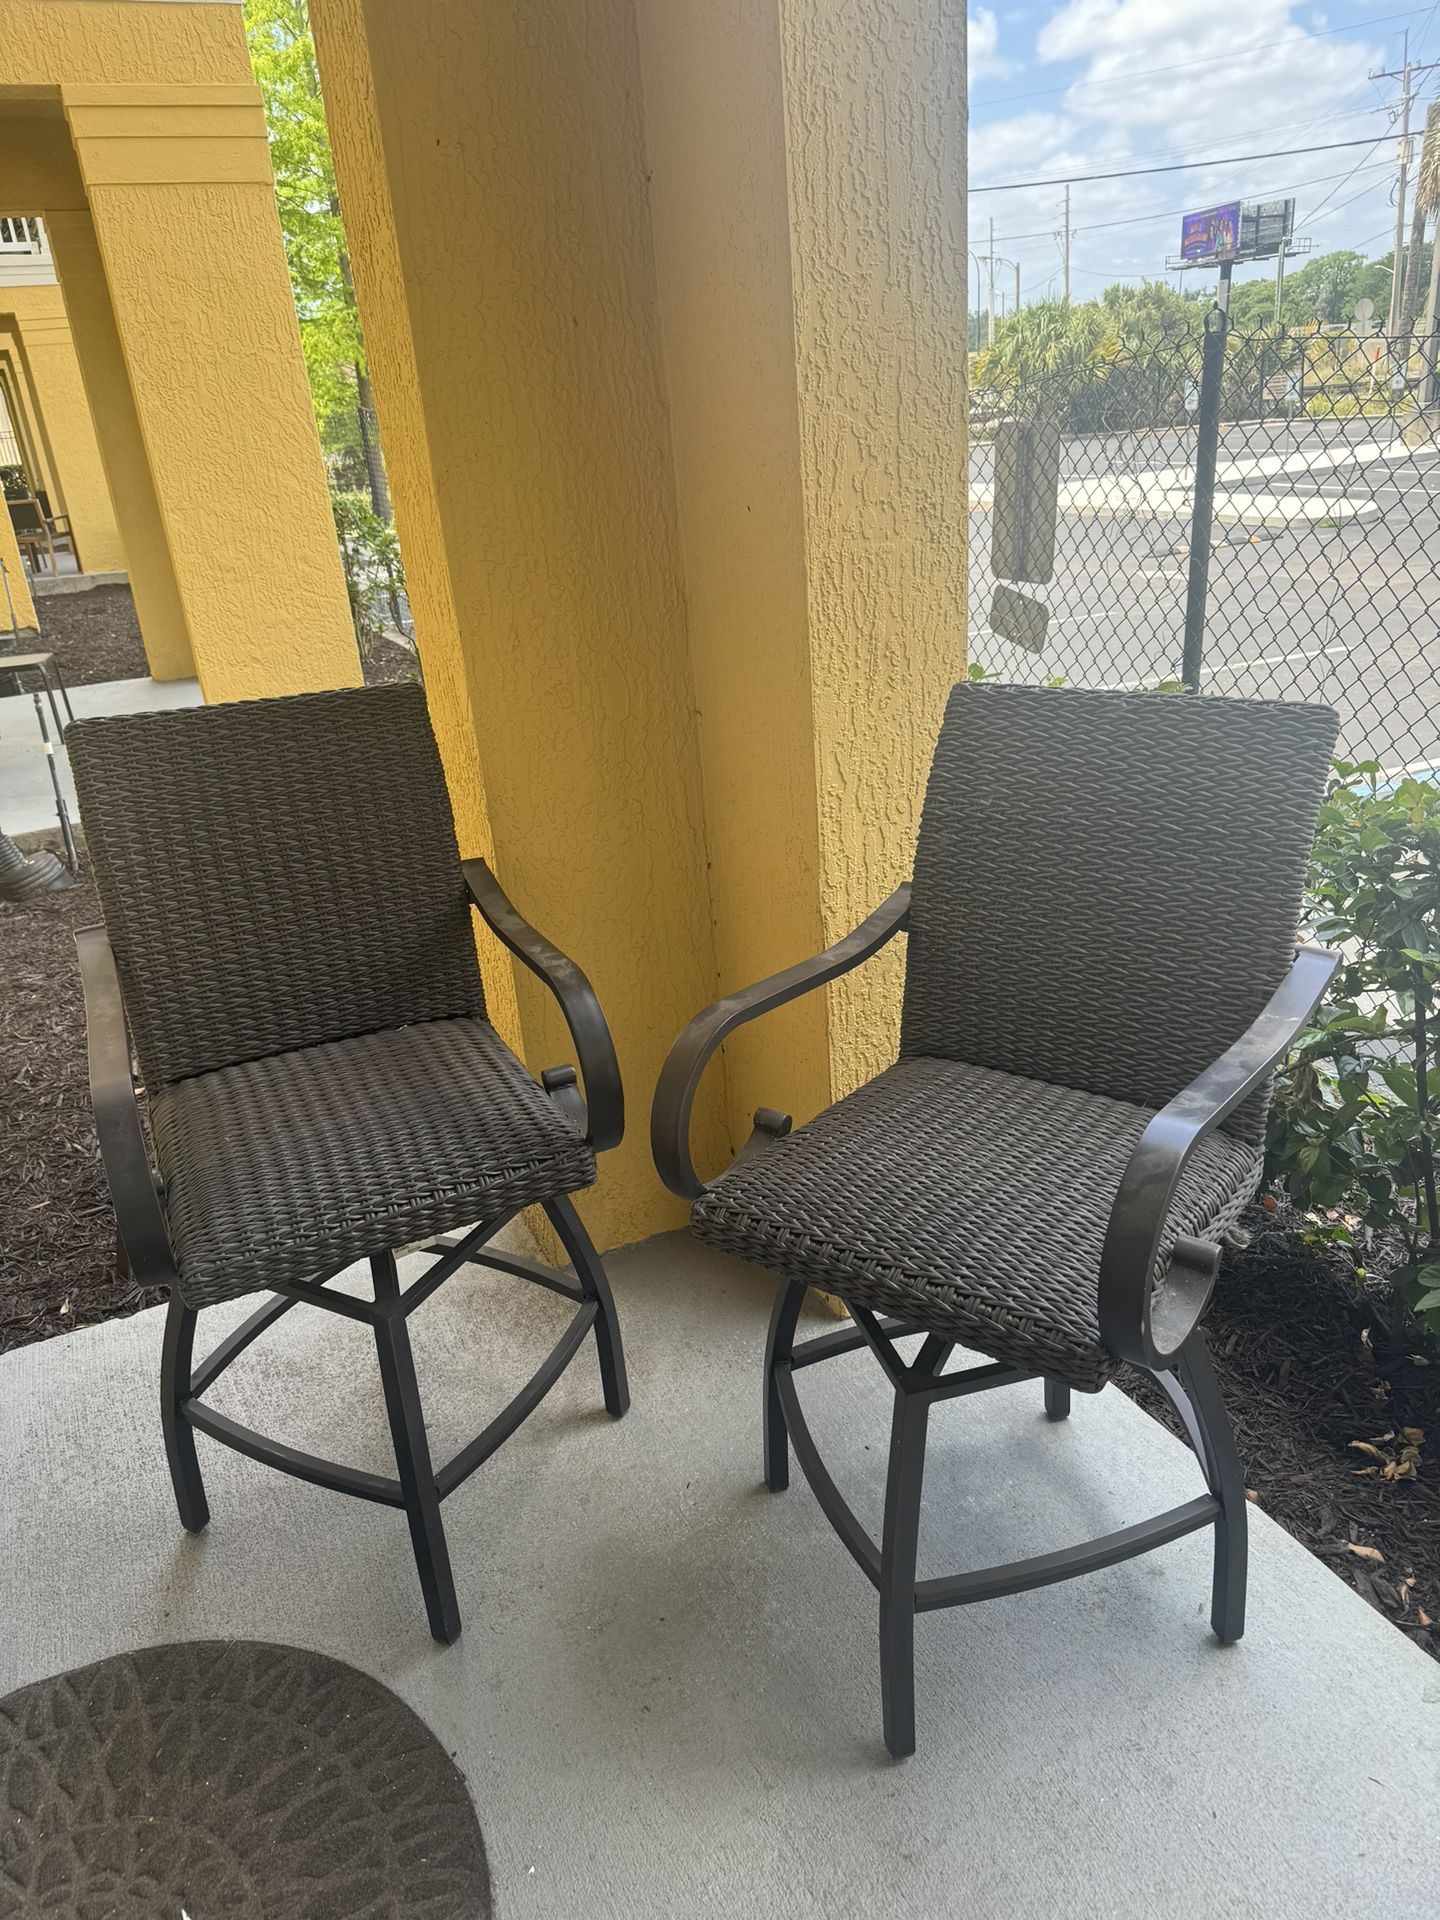 2 Patio Chairs Great Condition 